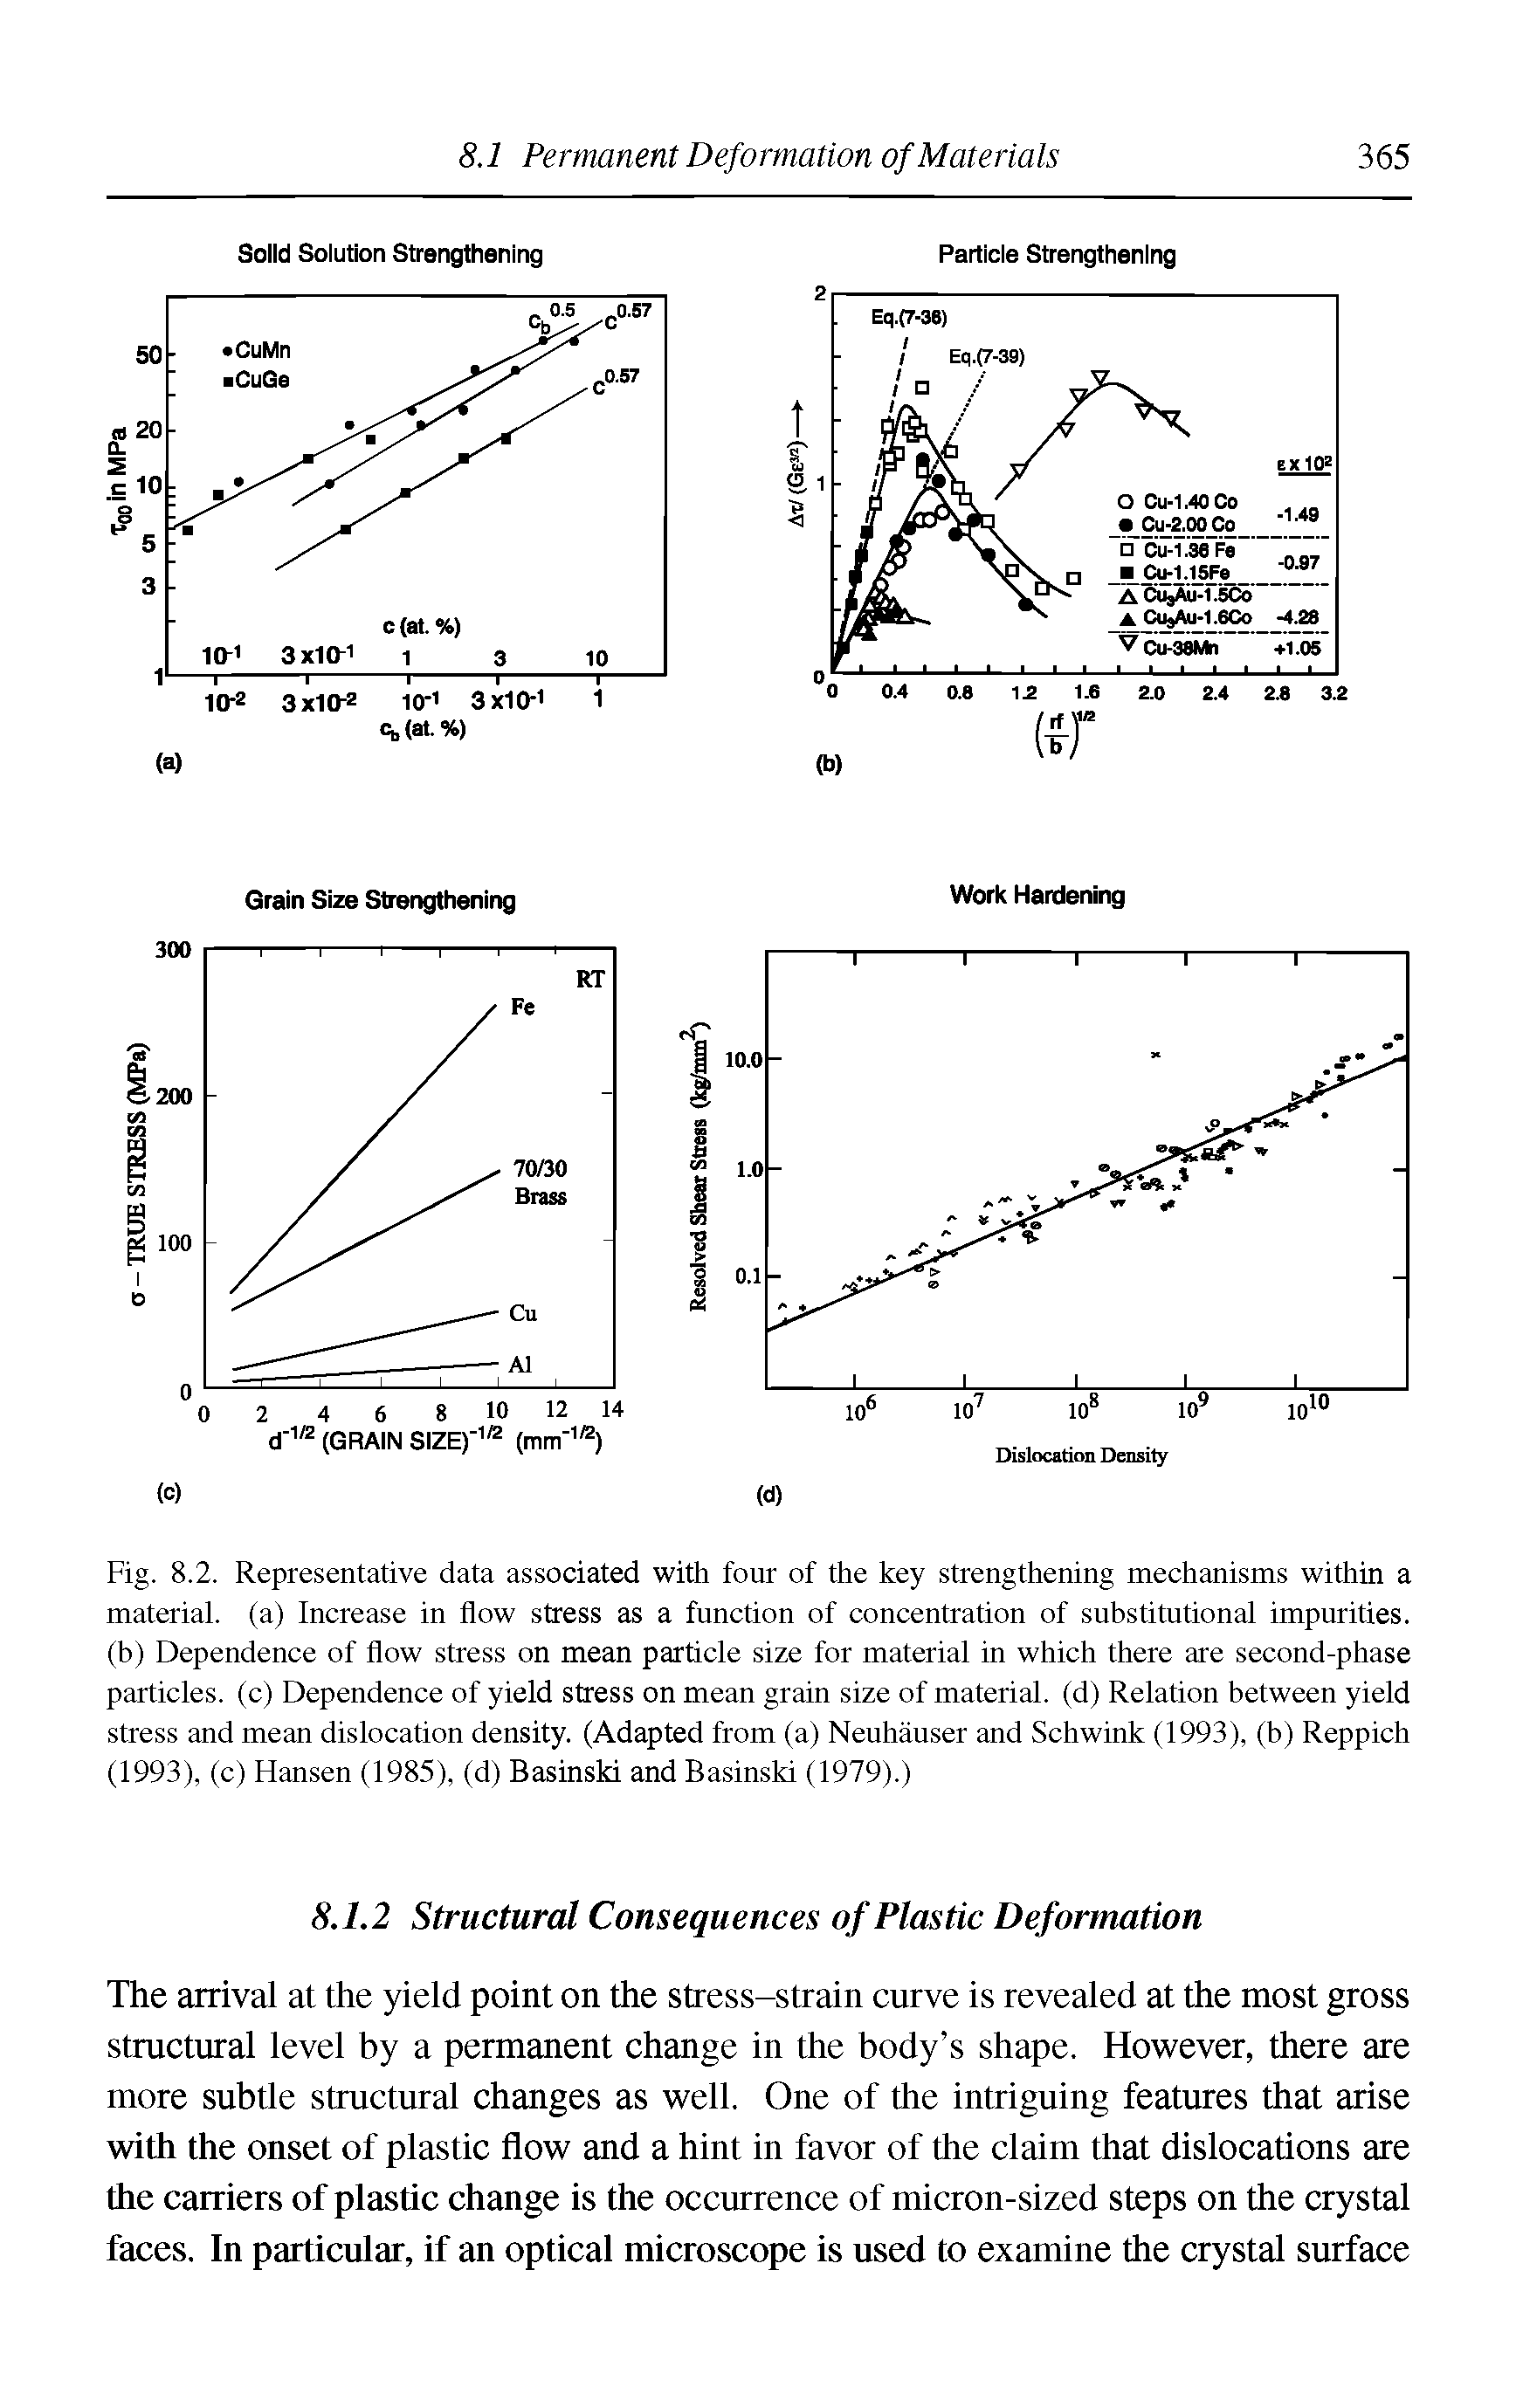 Fig. 8.2. Representative data associated with four of the key strengthening mechanisms within a material, (a) Increase in flow stress as a function of concentration of substitutional impurities, (b) Dependence of flow stress on mean particle size for material in which there are second-phase particles, (c) Dependence of yield stress on mean grain size of material, (d) Relation between yield stress and mean dislocation density. (Adapted from (a) Neuhauser and Schwink (1993), (b) Reppich (1993), (c) Hansen (1985), (d) Basinski and Basinski (1979).)...